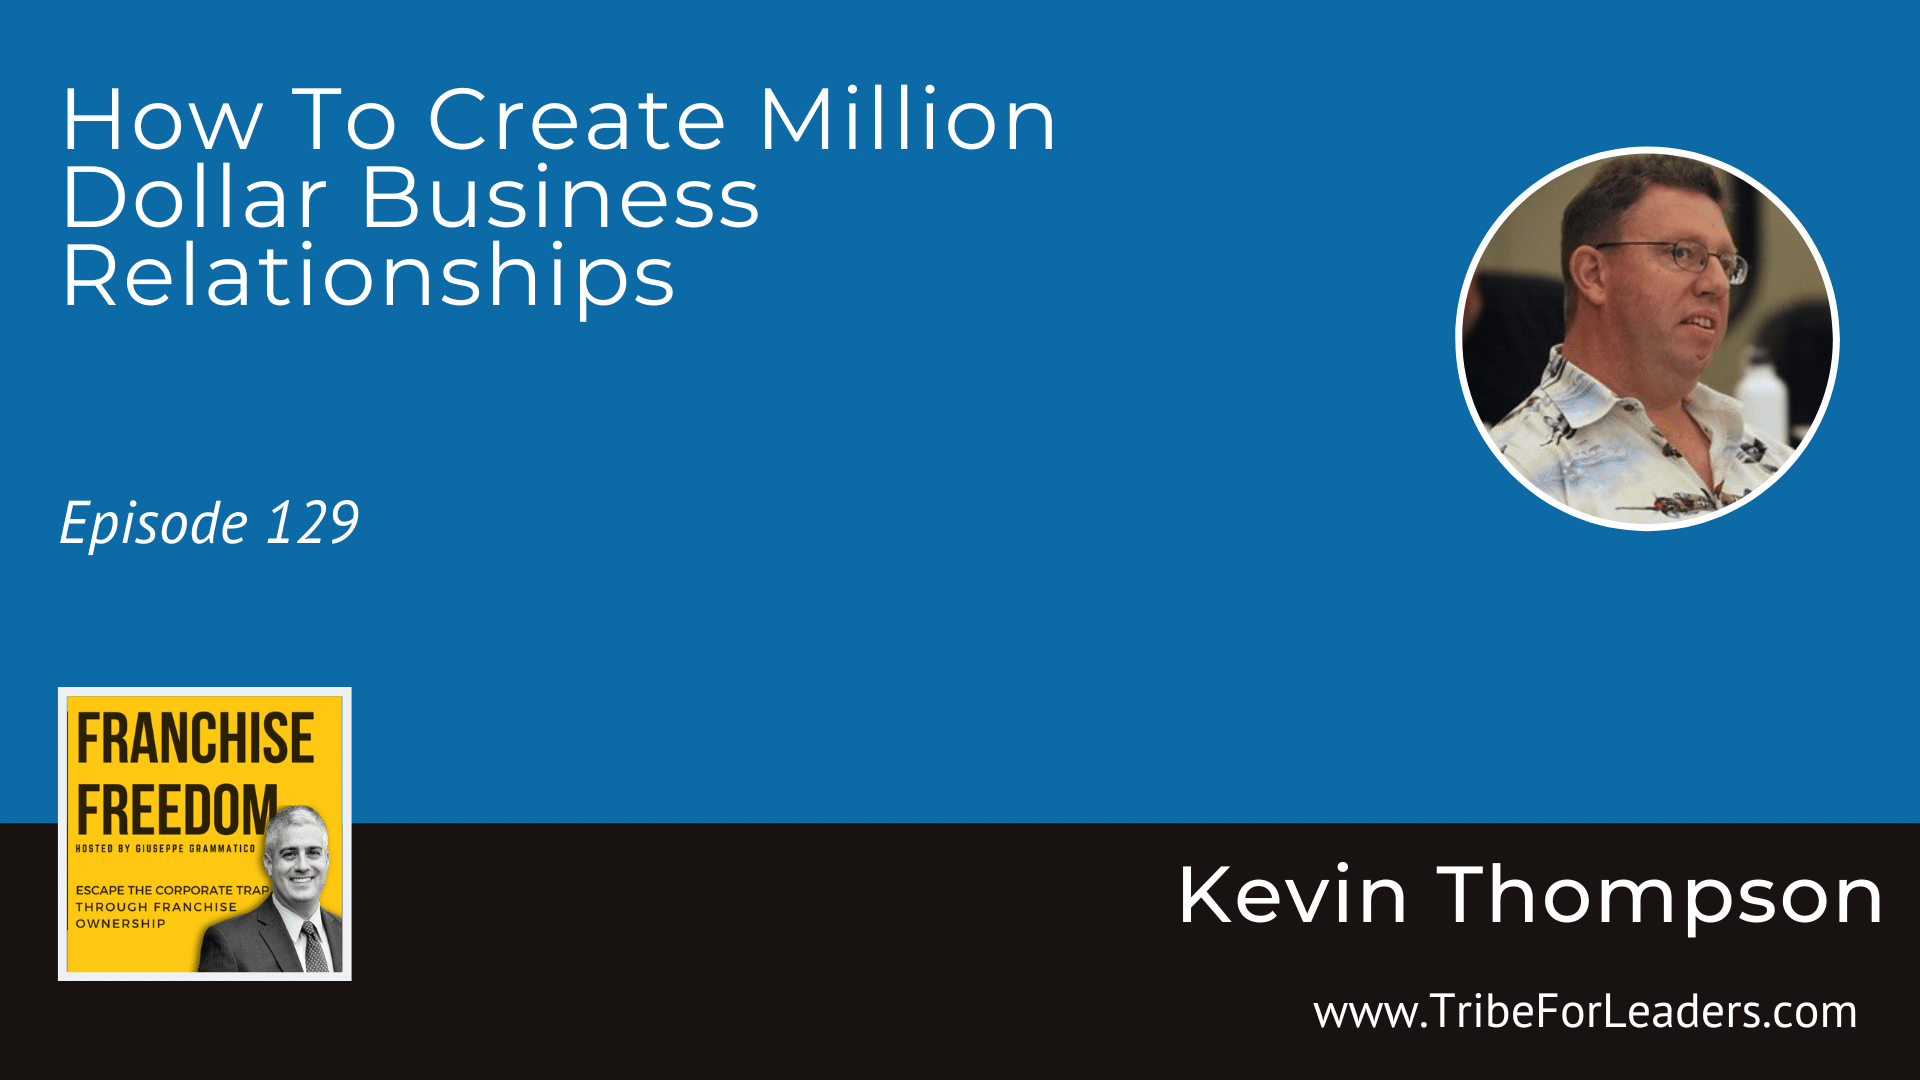 How To Create Million Dollar Business Relationships